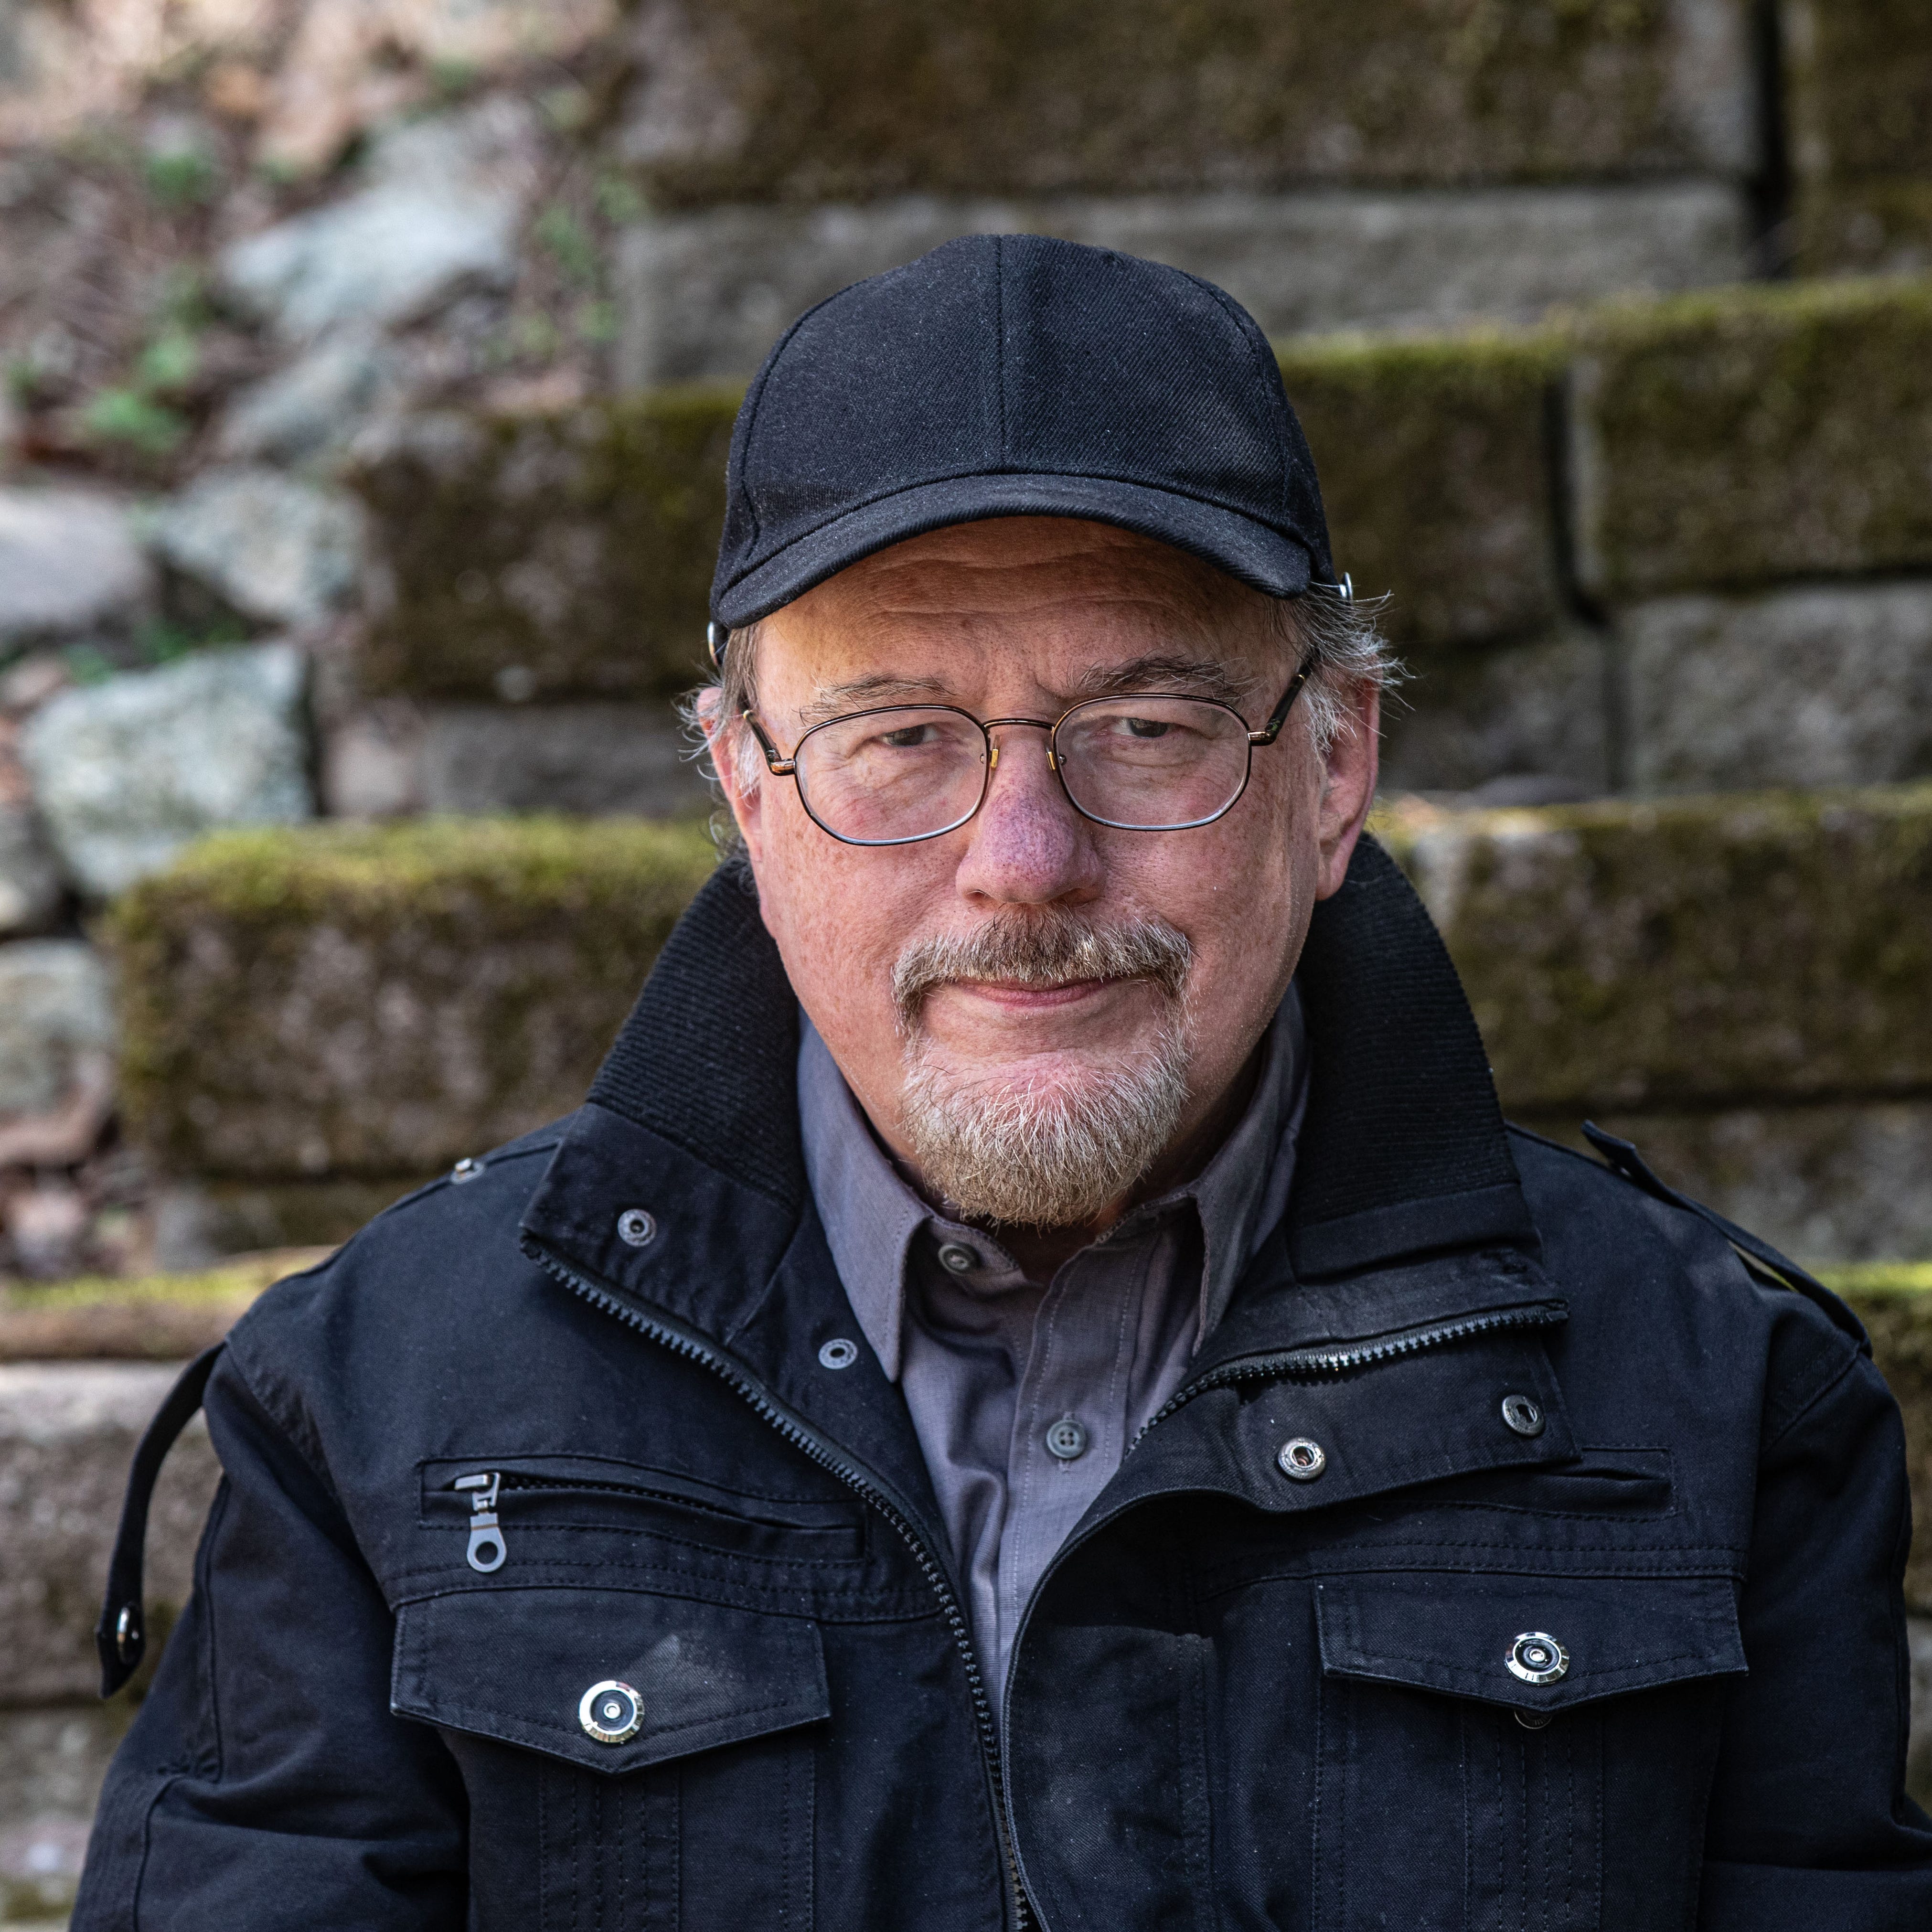 Award-winning composer and writer Rupert Holmes outside his home in Cold Spring, N.Y. April 11, 2023. Holmes latest book is ÒMurder Your Employer: The McMasters Guide to Homicide.Ó